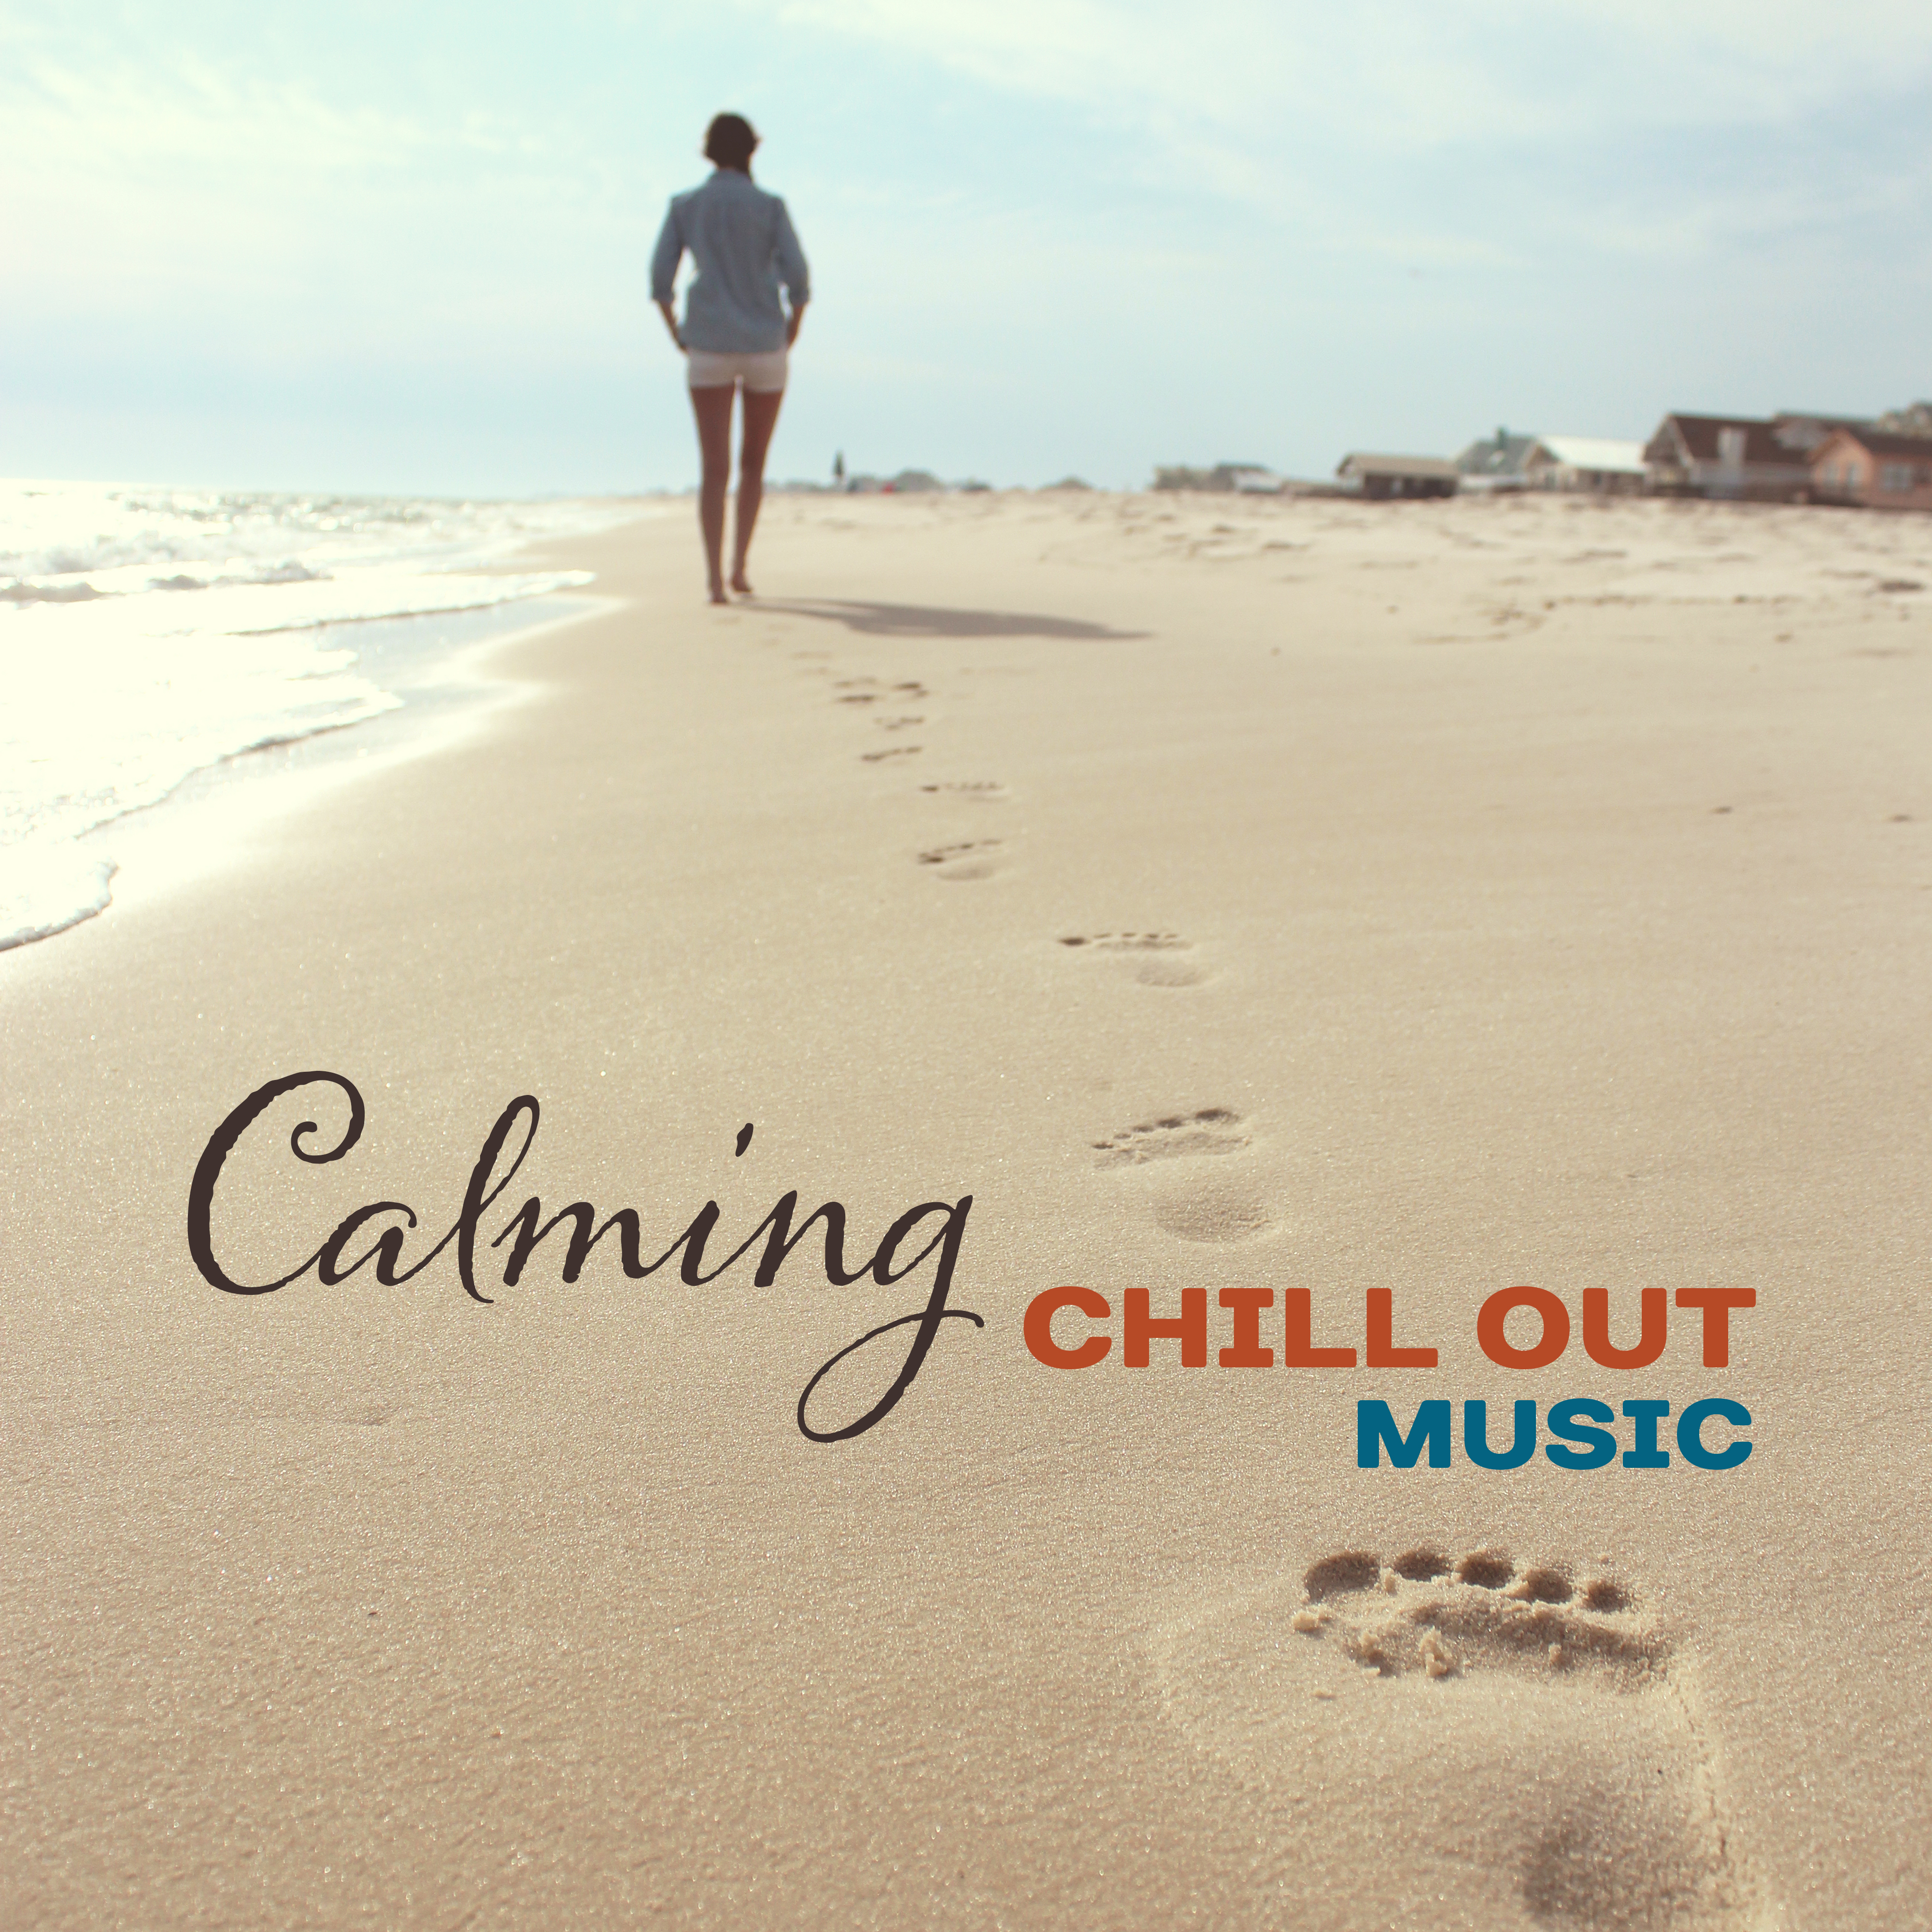 Calming Chill Out Music – Chill Out Sounds to Relax, Ibiza Calmness, Beach Lounge, Sun Summer Music